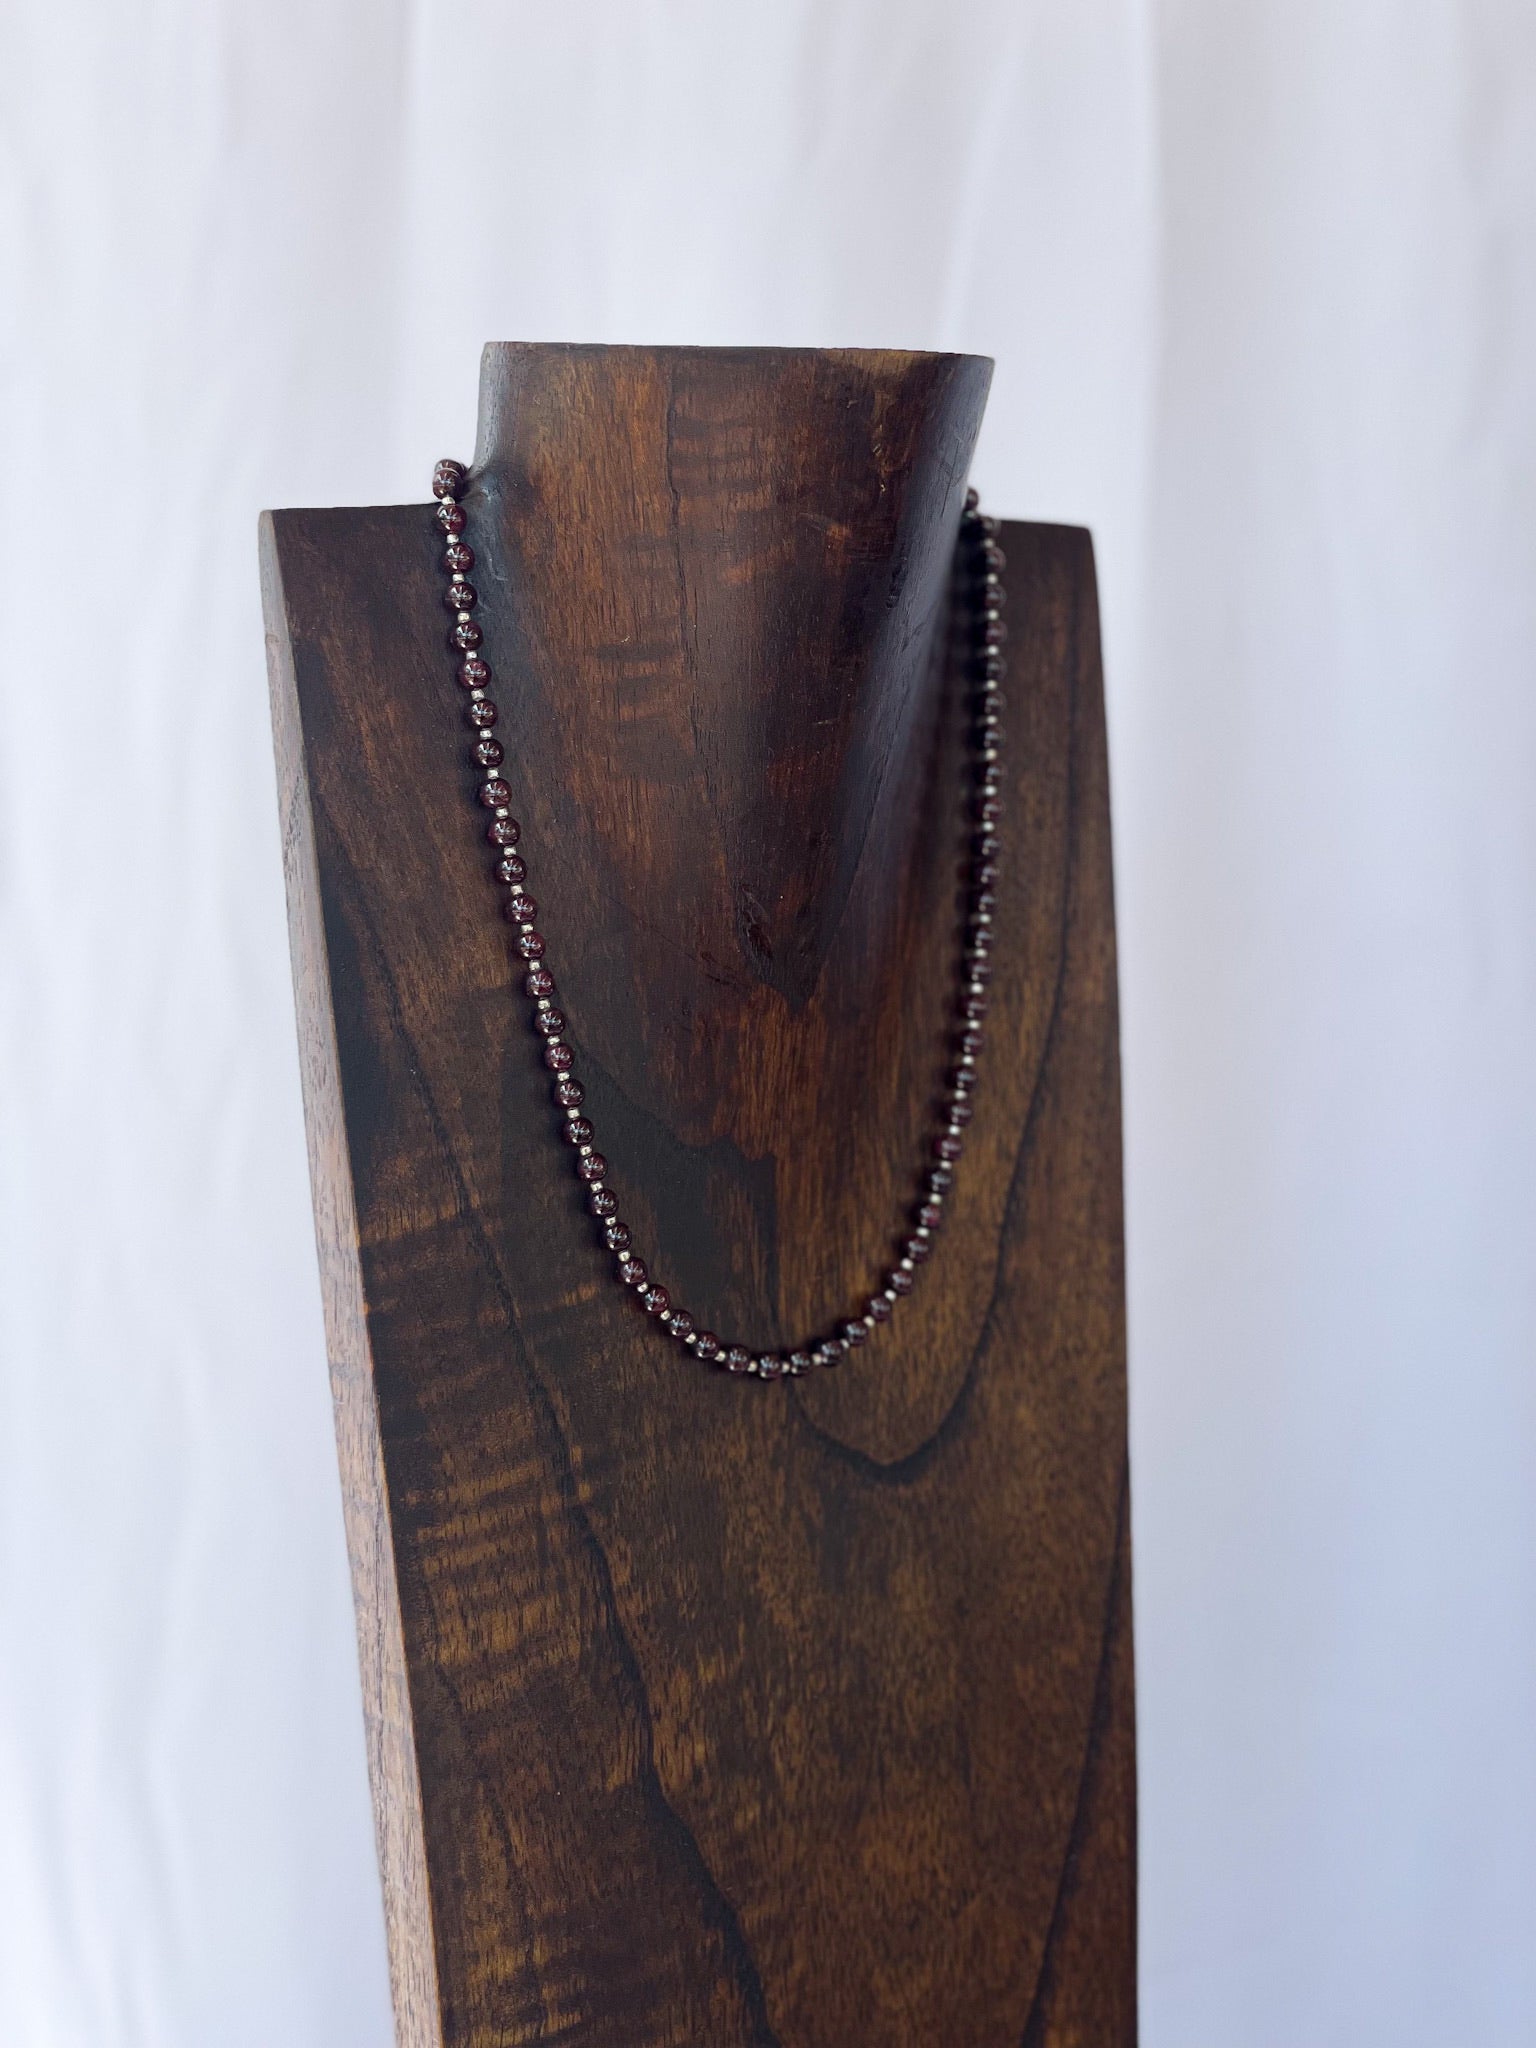 The Merlot (Seed Beads) Necklace